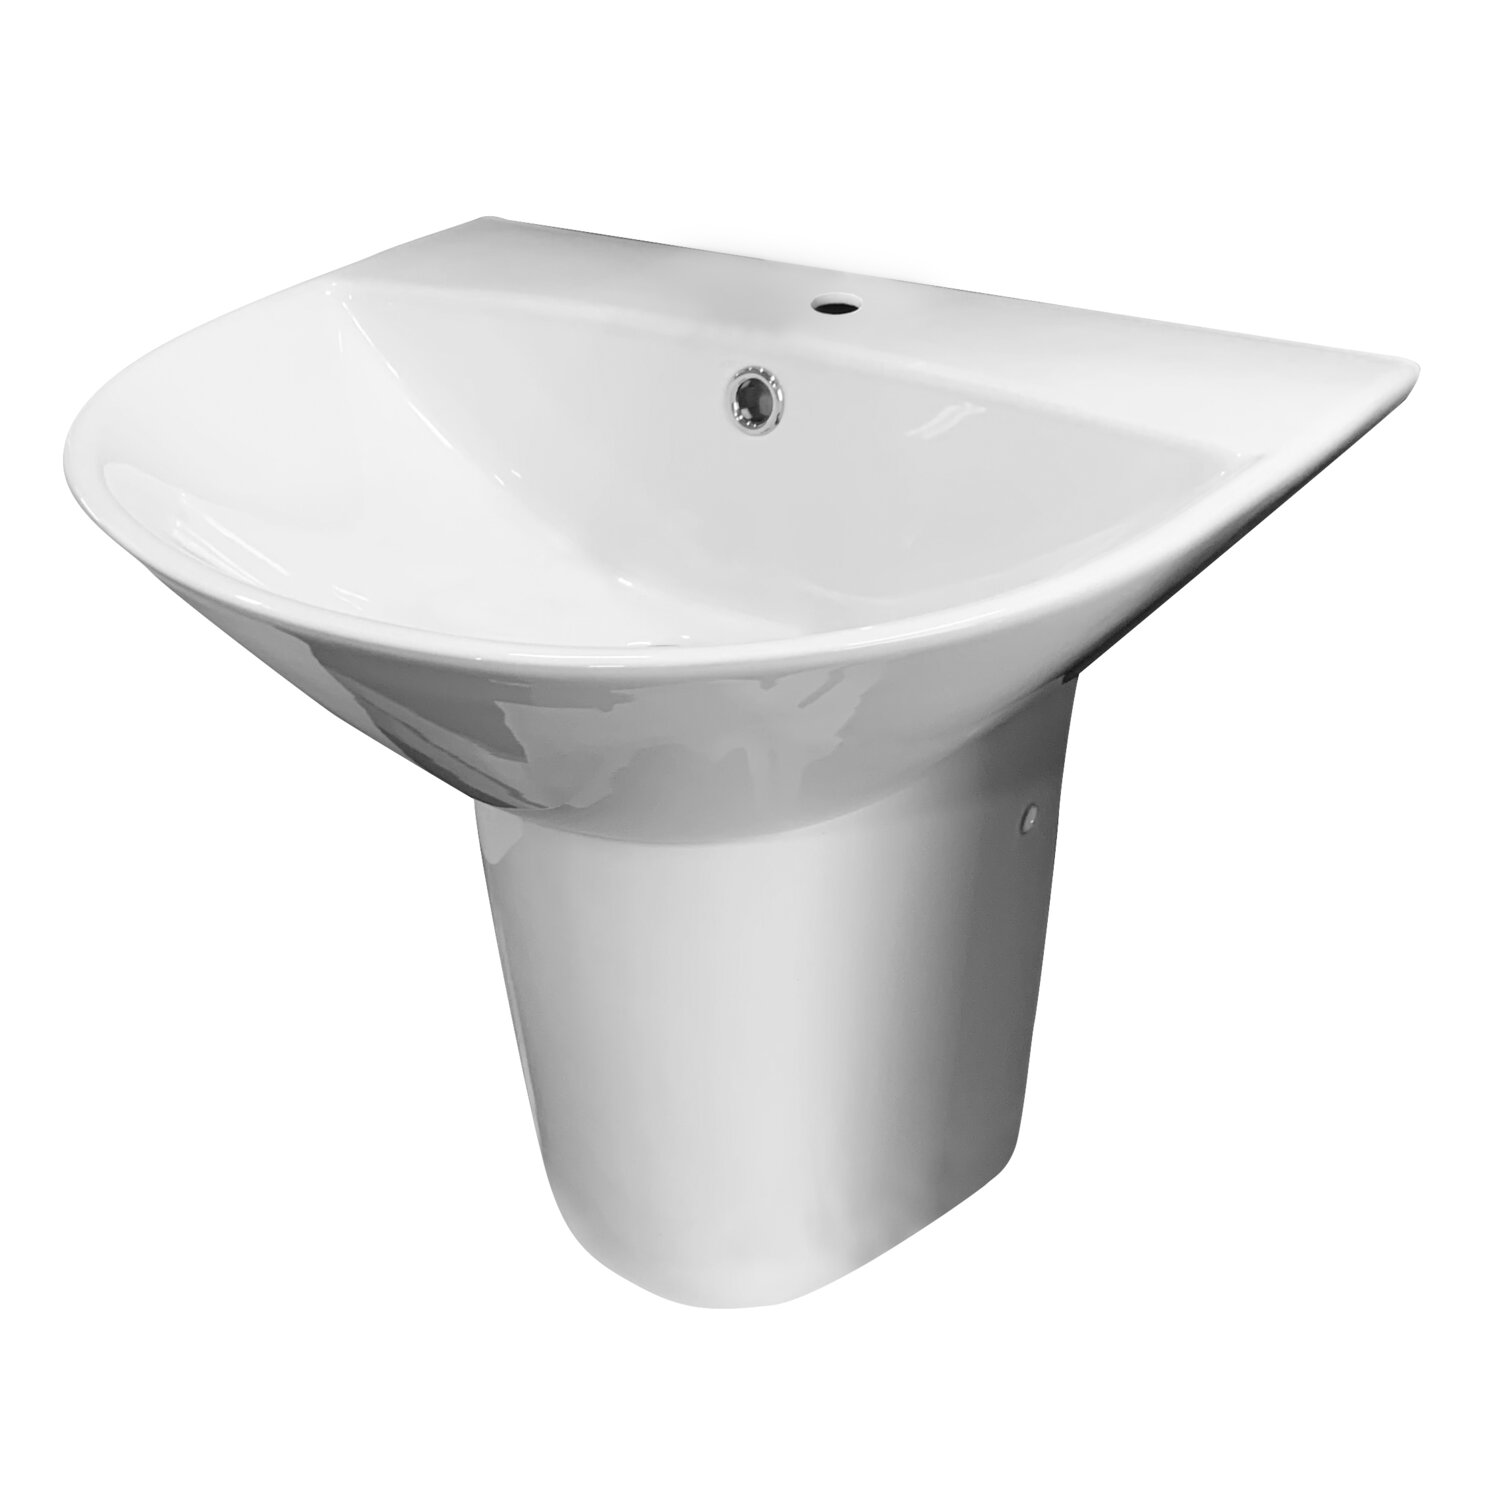 Ovia Care Wall-Hung Disabled Basin with Integral Shroud